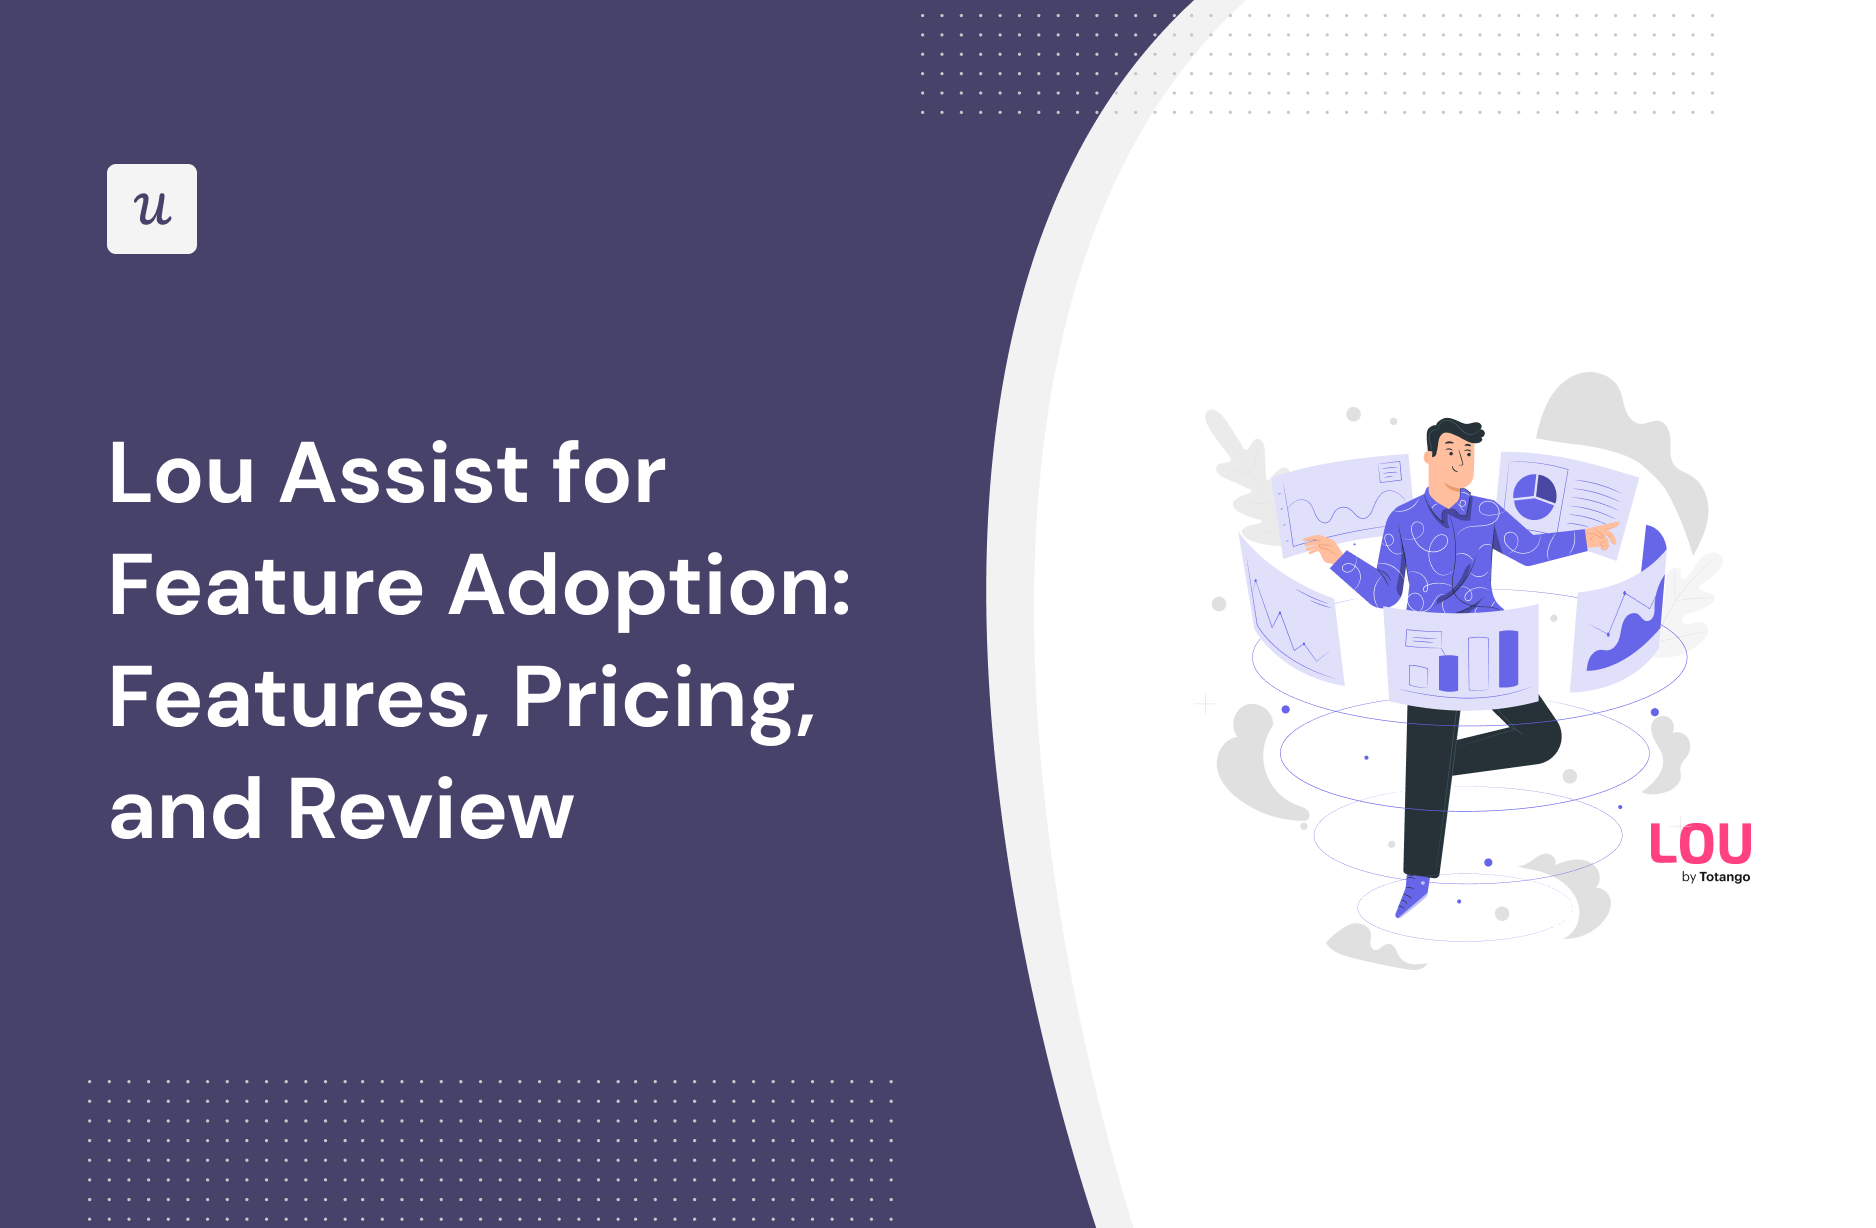 Lou Assist for Feature Adoption: Features, Pricing, and Review